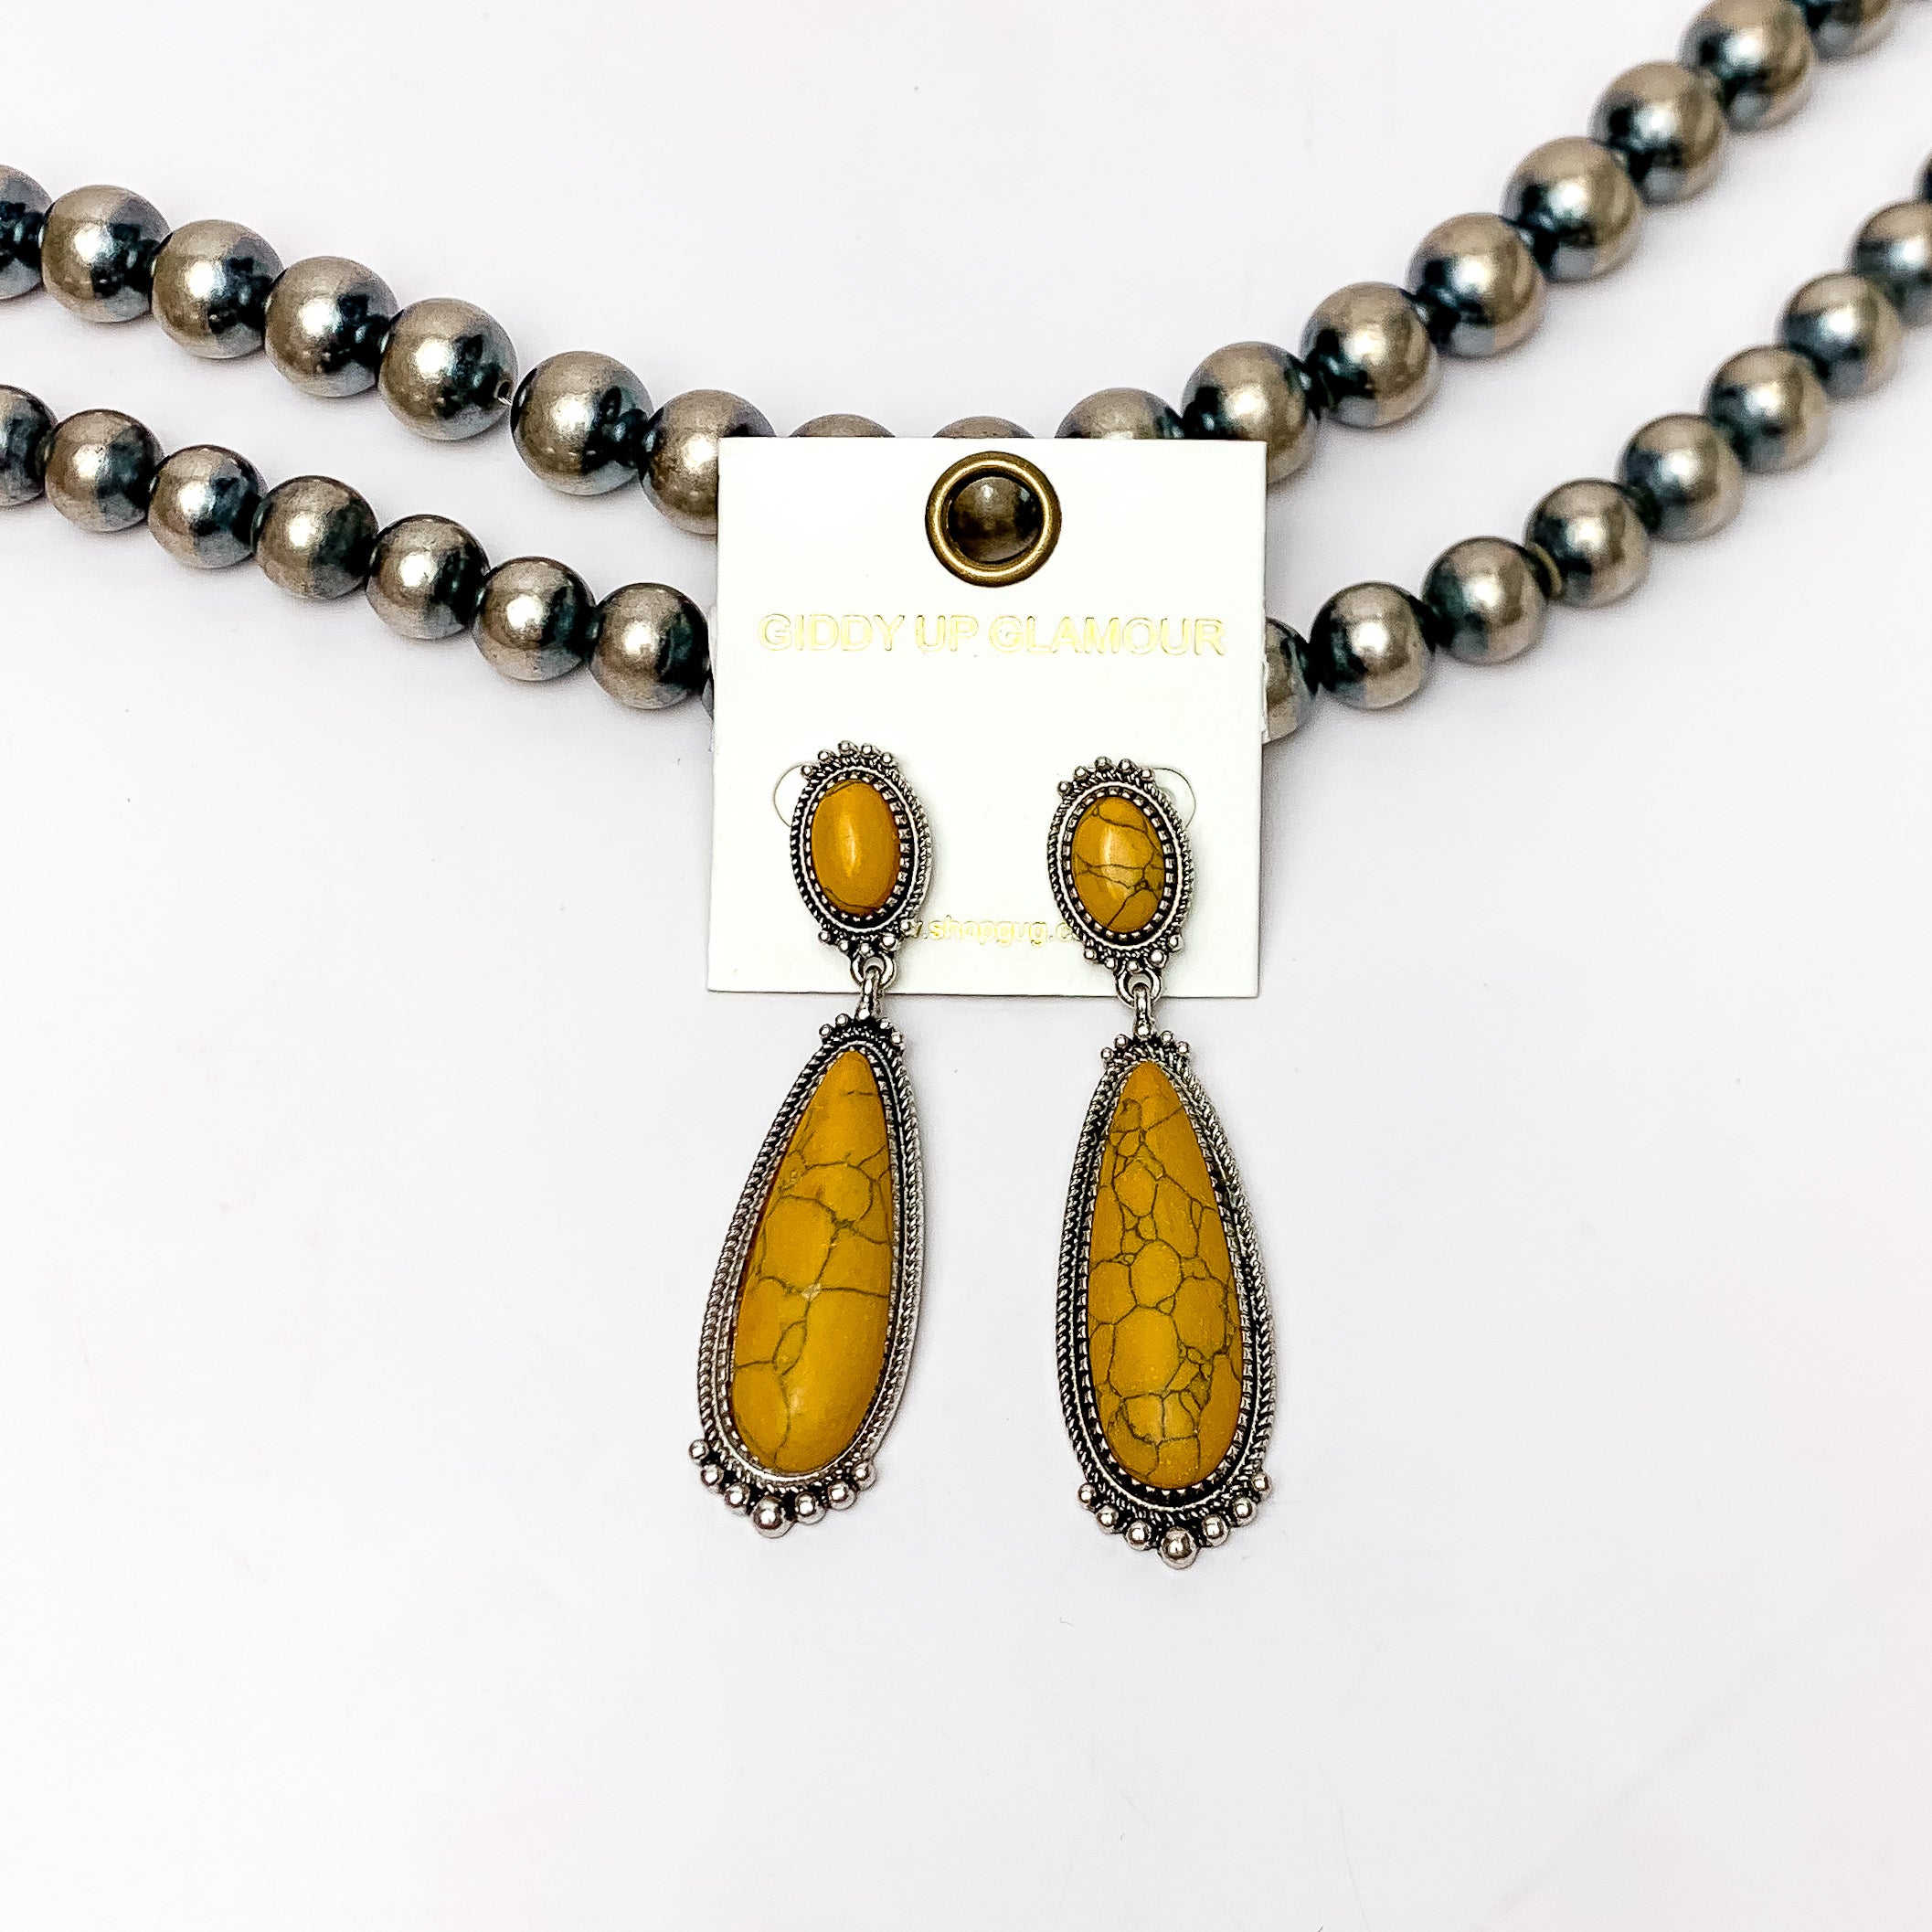 Southern Saturdays Silver Tone Drop Earrings in Yellow. These earrings featured two large stones. The background of the picture is white and the earrings are laying against Navajo pearls.